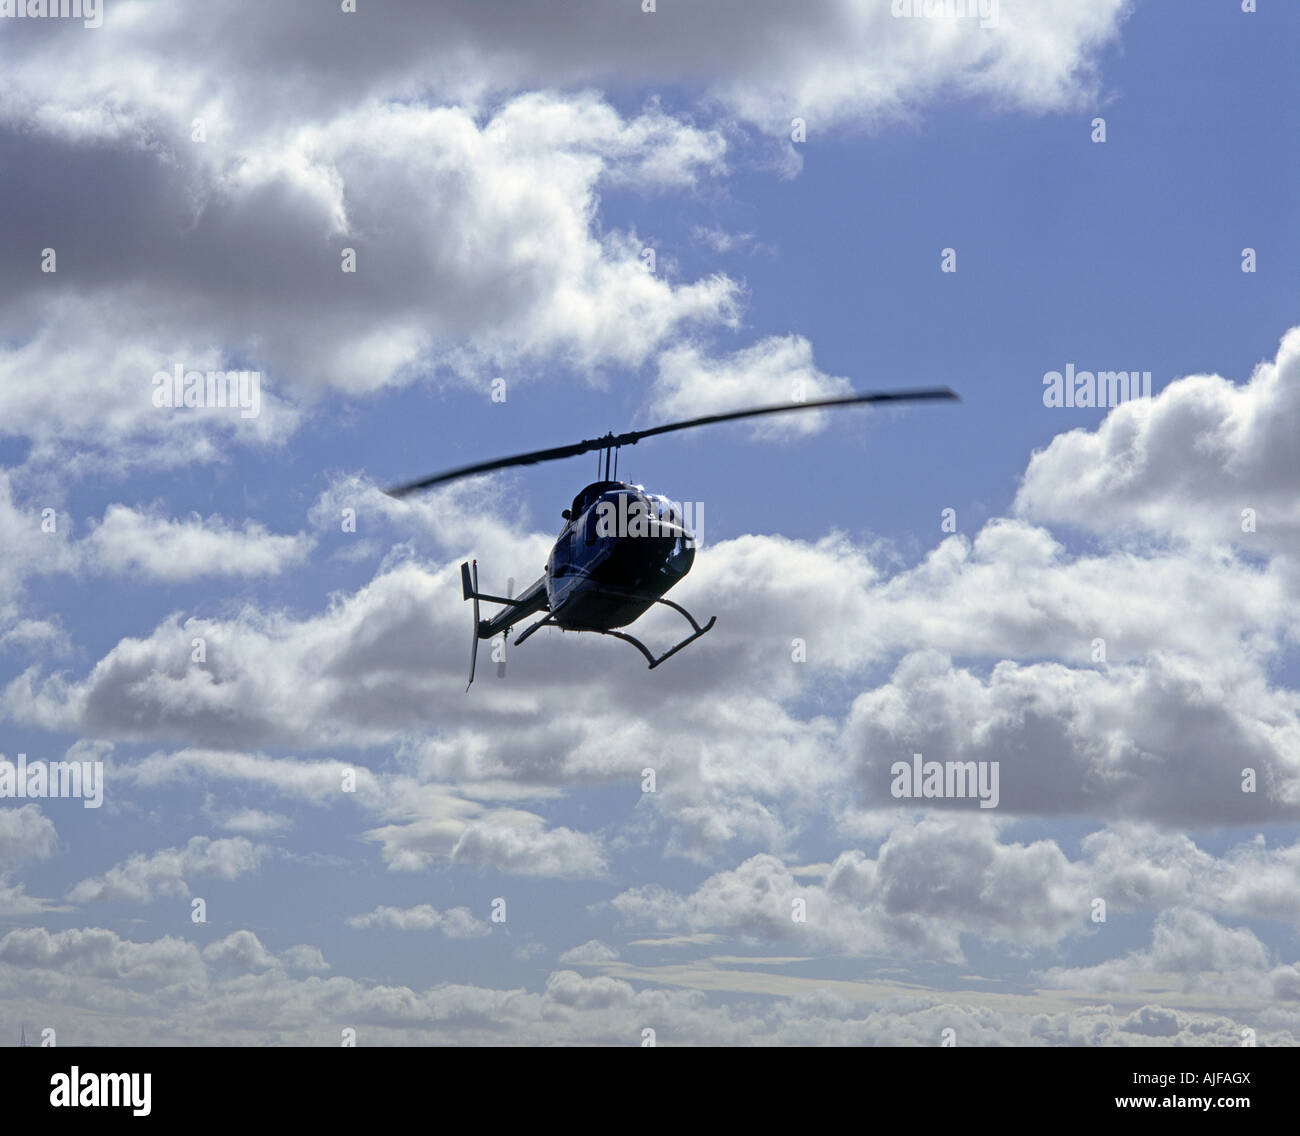 A helicopter Stock Photo